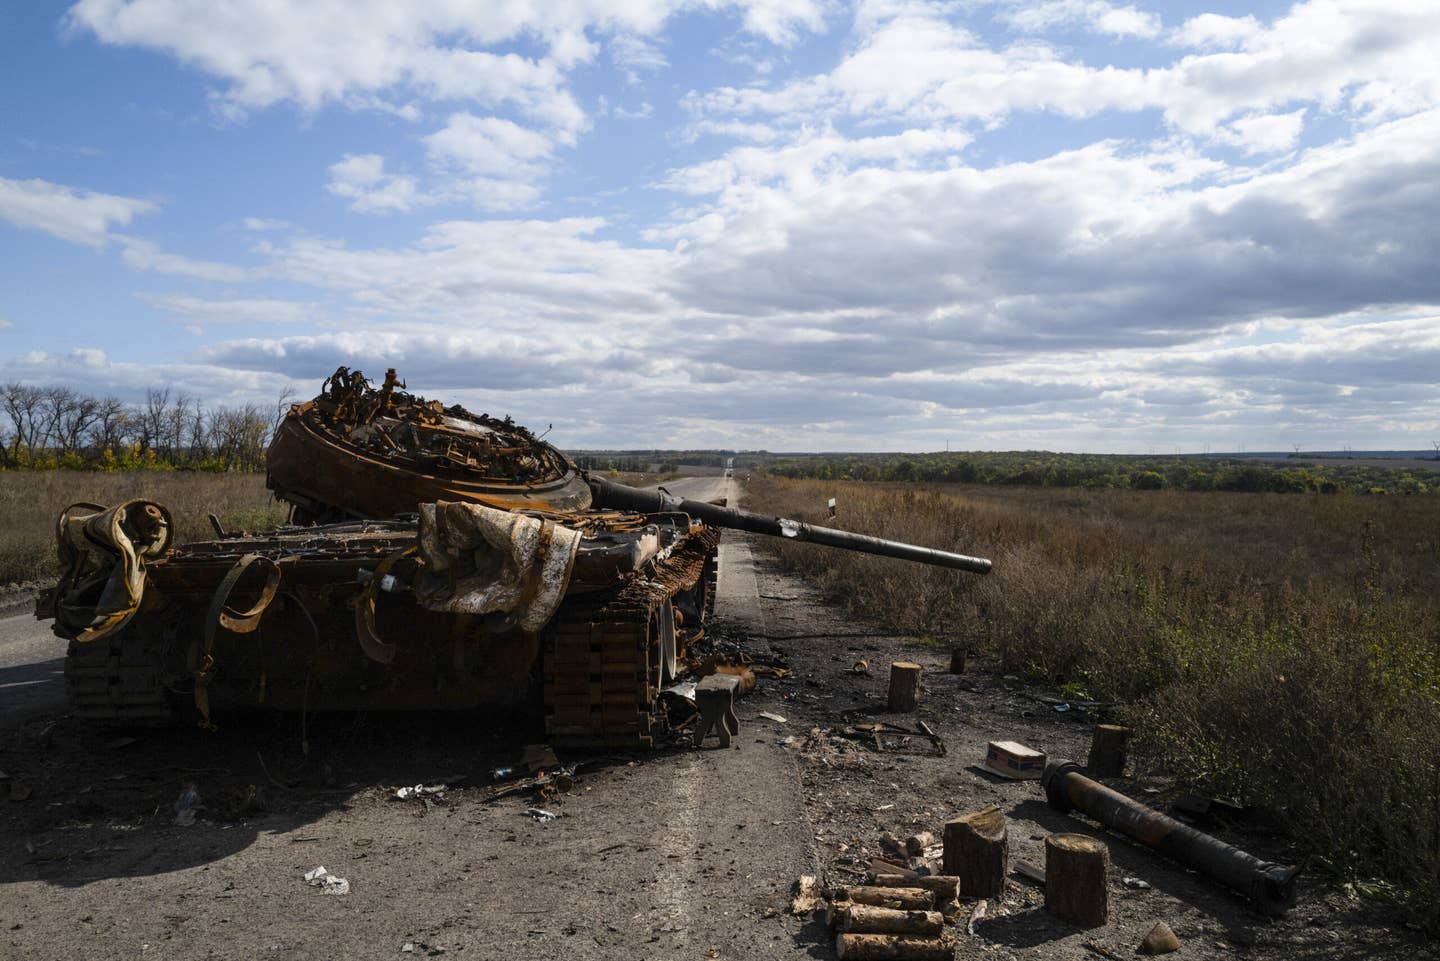 A destroyed Russian tank is seen outside of Izyum district of Kharkiv Oblast, Ukraine, on October 13, 2022. <em>Photo by Wolfgang Schwan/Anadolu Agency via Getty Images</em>